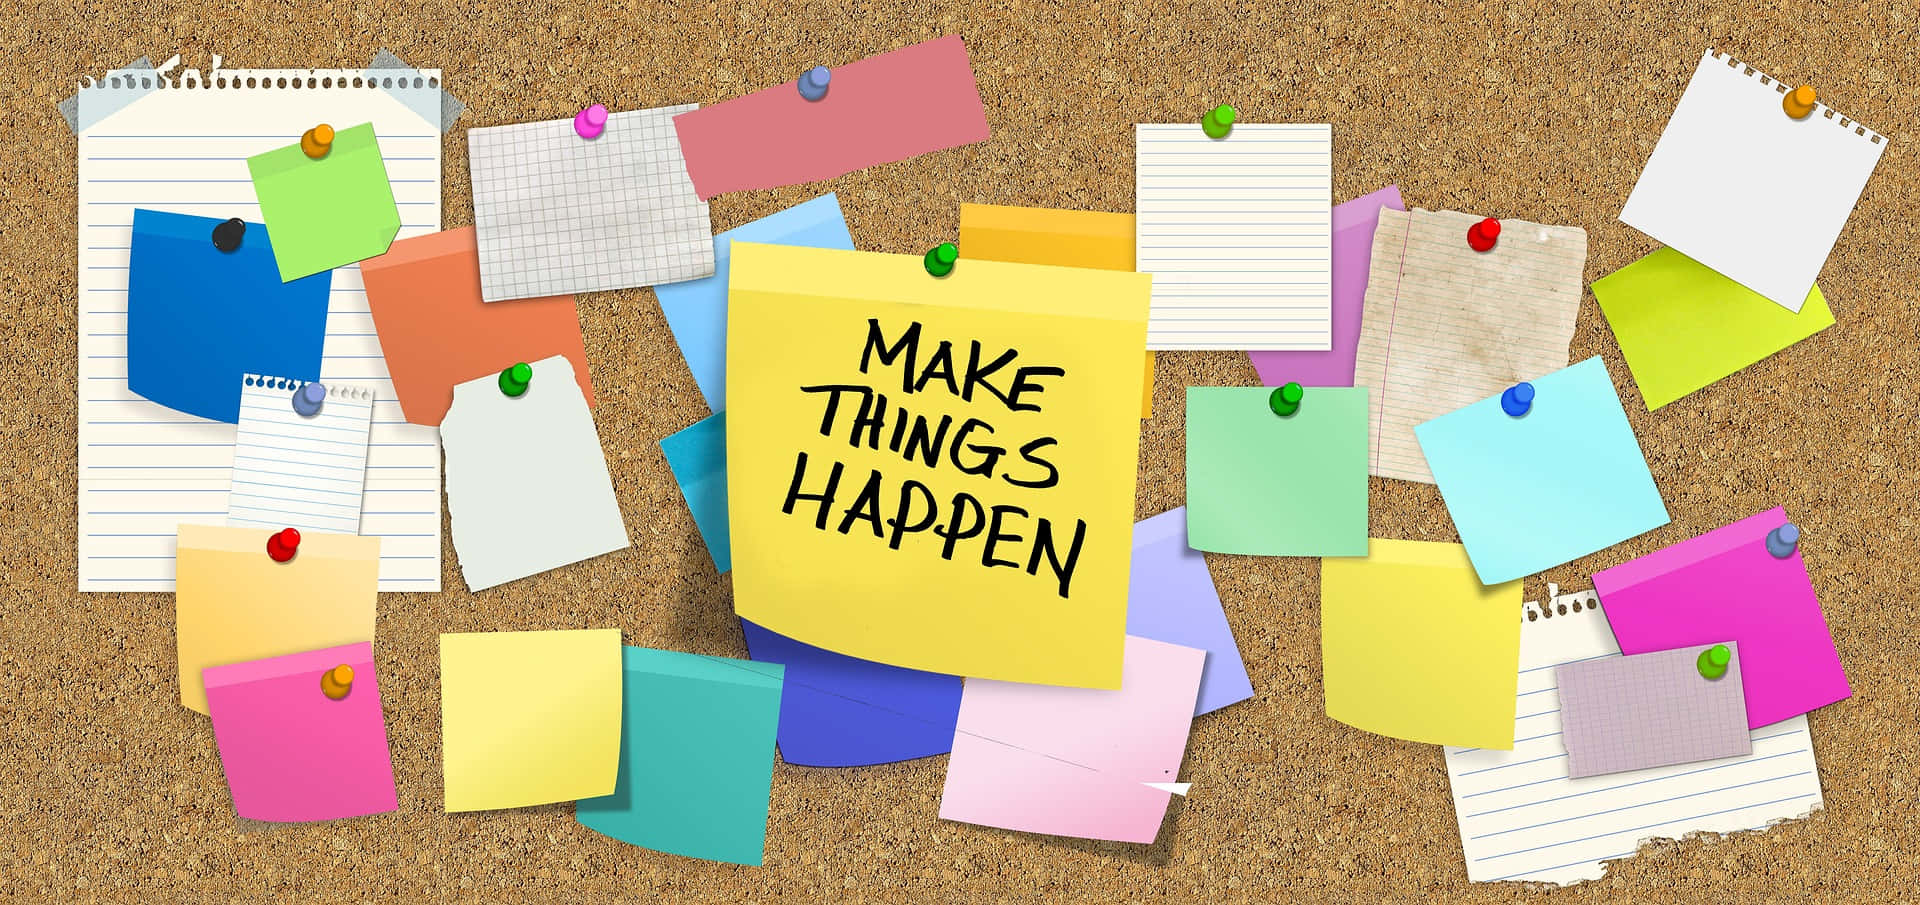 Making Things Happen Competent Wallpaper